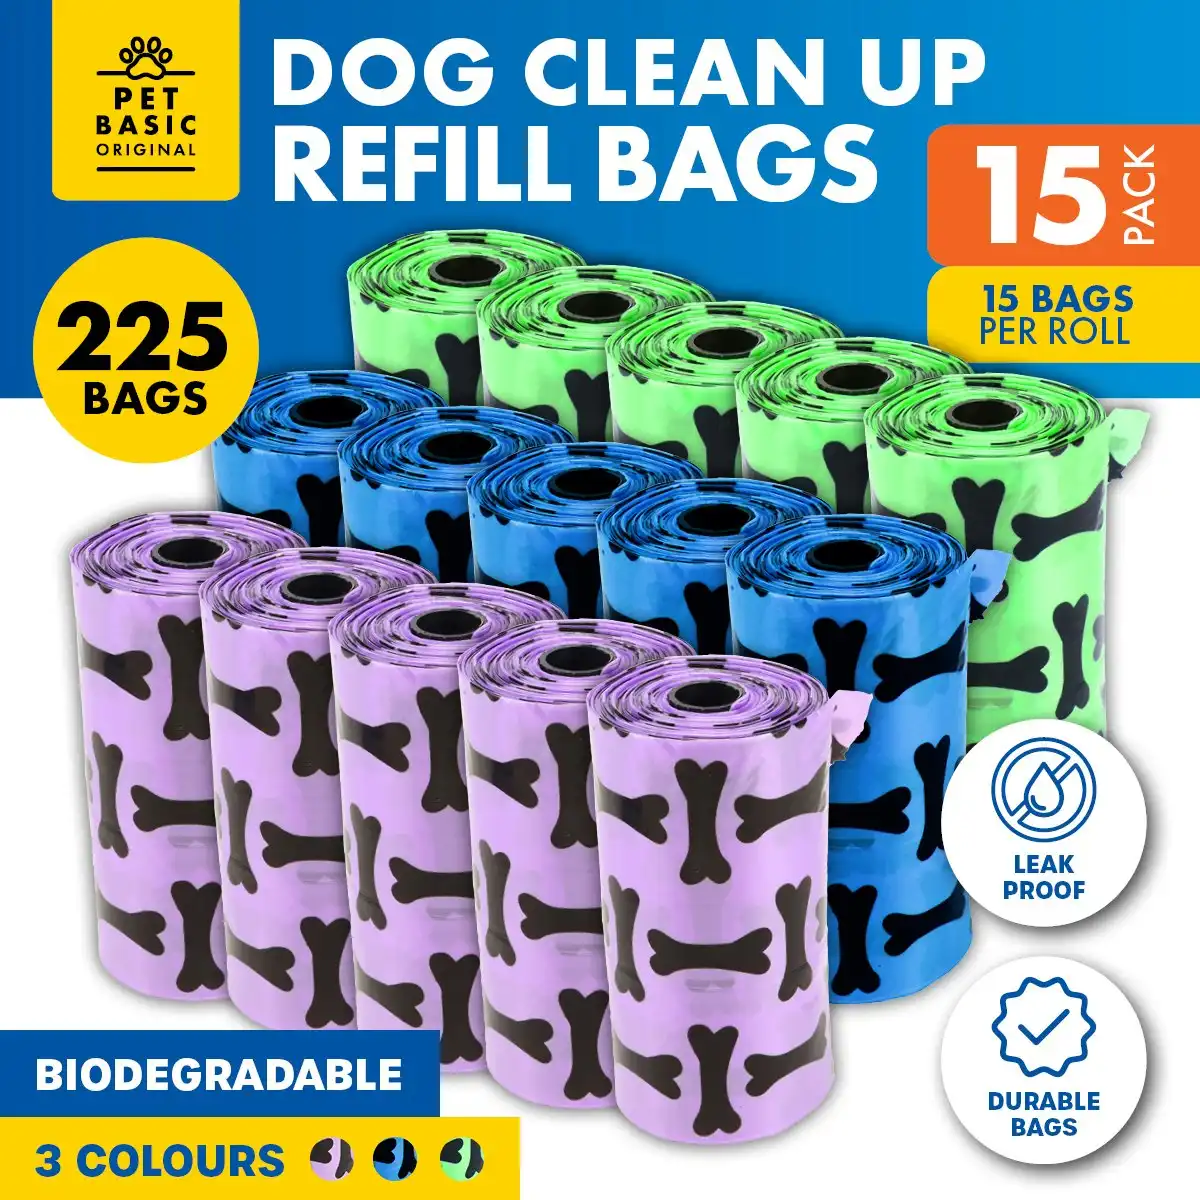 Pet Basic 225PCE Dog Waste Clean Up Refill Bags Coloured Strong Leak Proof